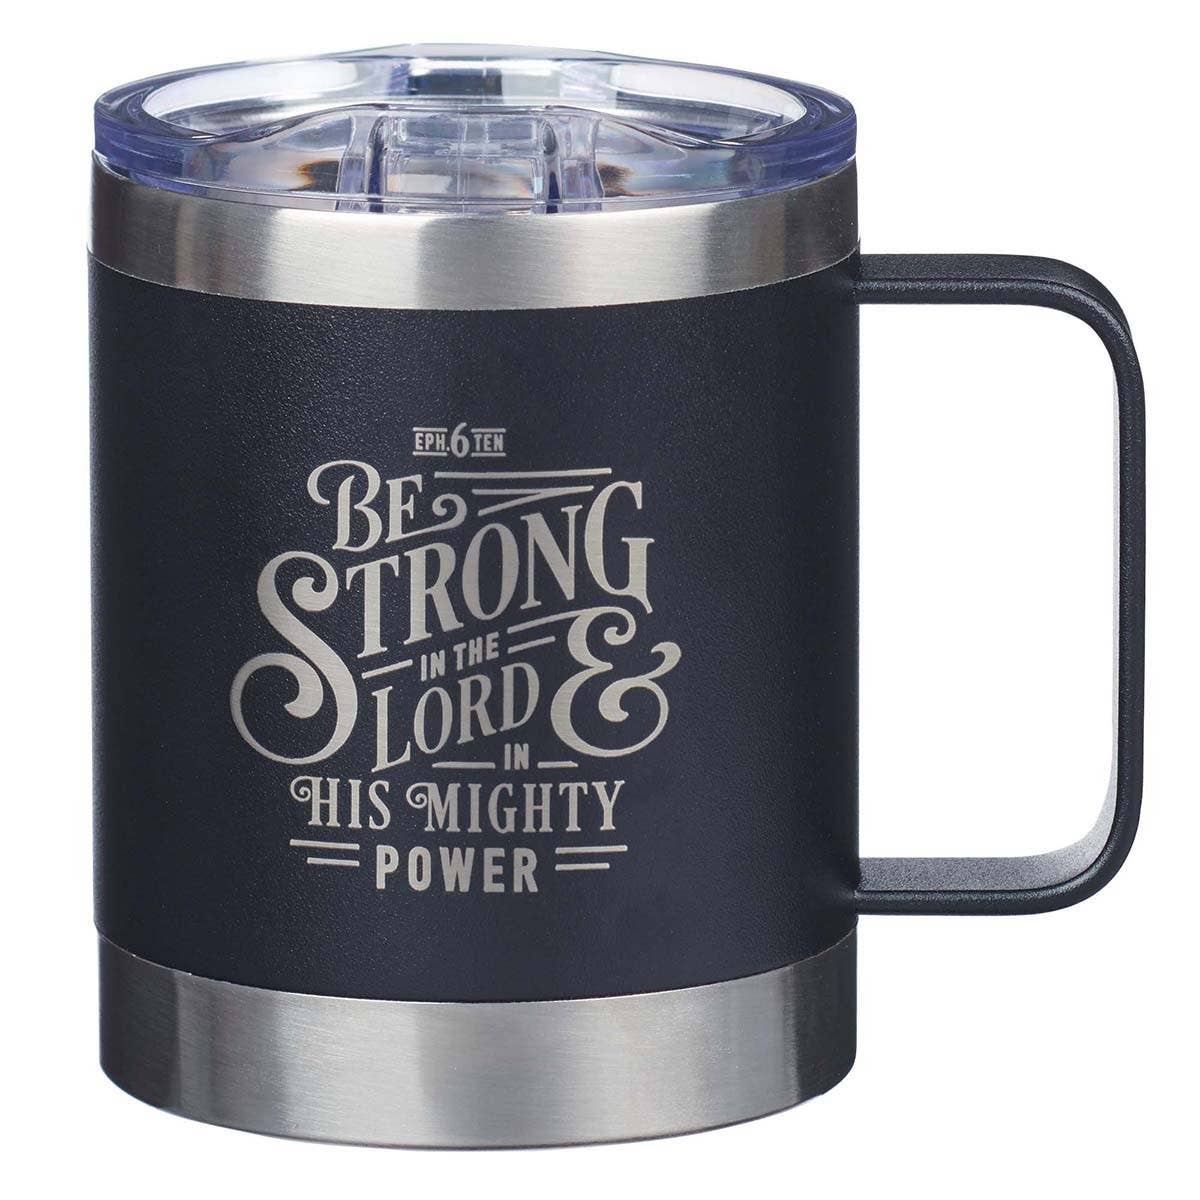 Be Strong in the LORD Camp-style Stainless Steel Mug - Ephesians 6:10